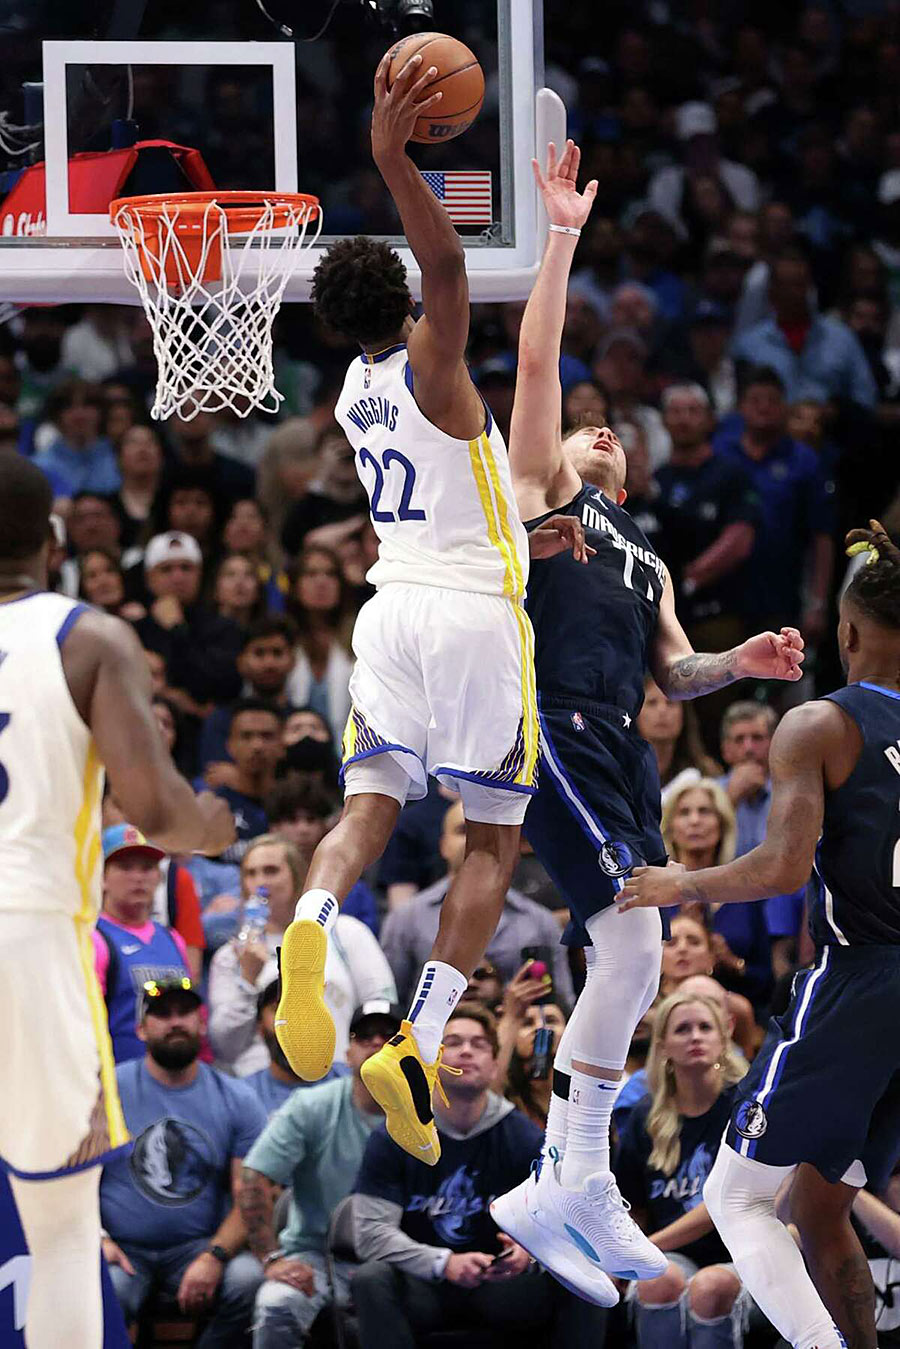 Andrew Wiggins Poster